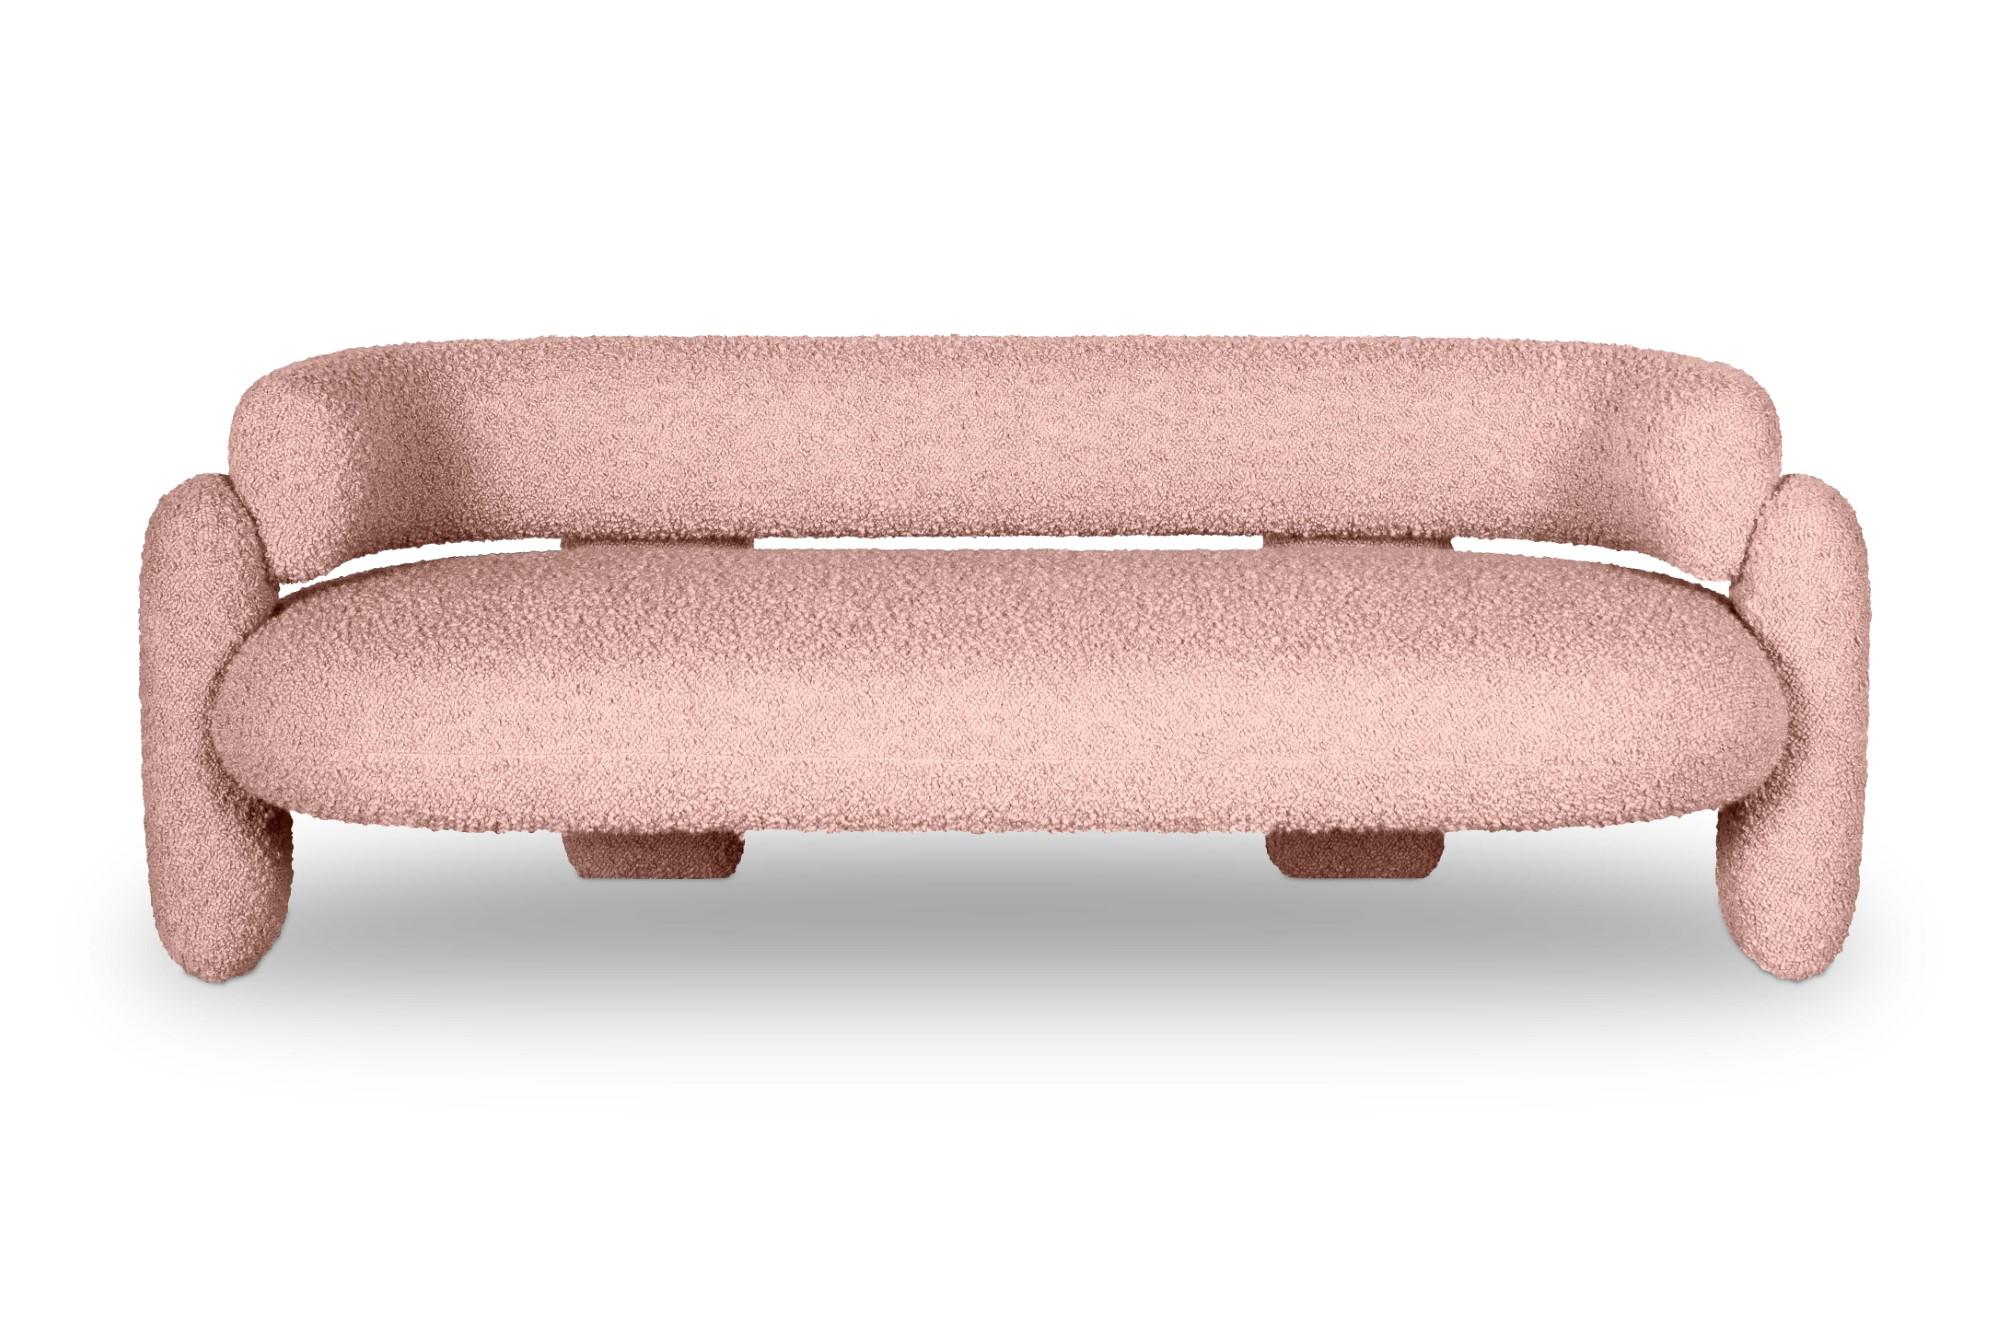 Embrace Cormo Blossom Sofa by Royal Stranger
Dimensions: W 200 x H 70 x D 90 cm. Seat height 47 cm.
Materials: solid wood frame, foam, upholstery.
Available in other Royal Stranger’s fabrics and in COM. 

Embrace Sofa is fond of neat lines. It